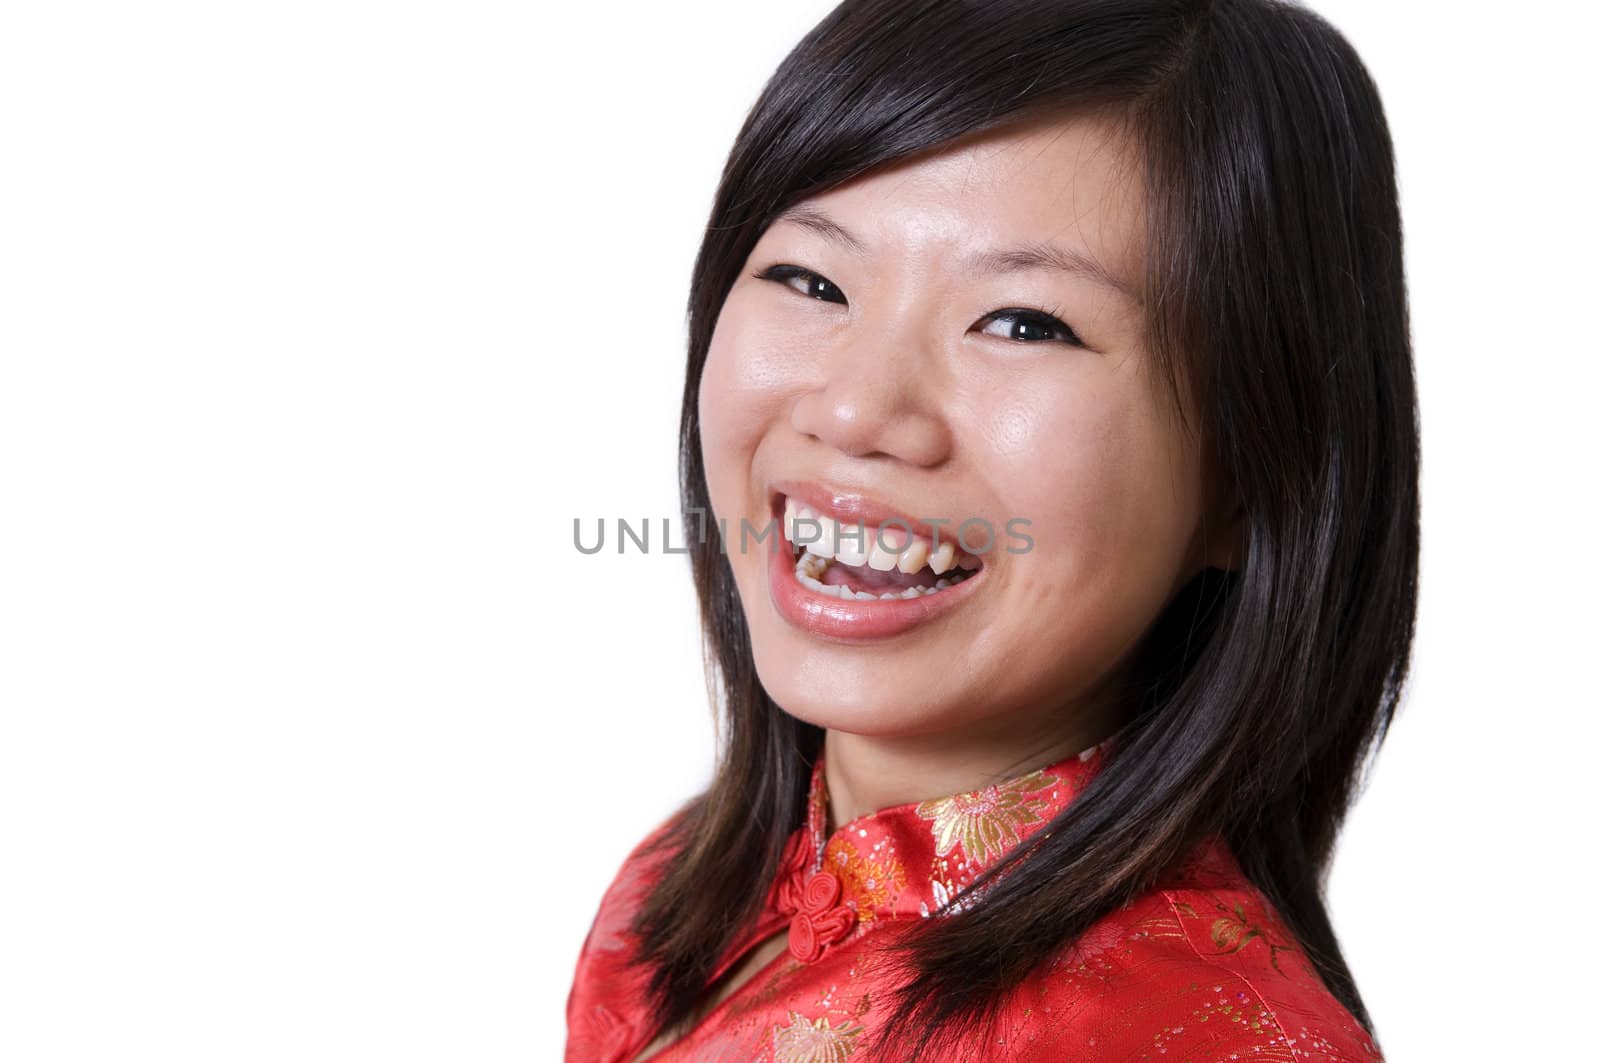 Young Asian girl having a great smile.
